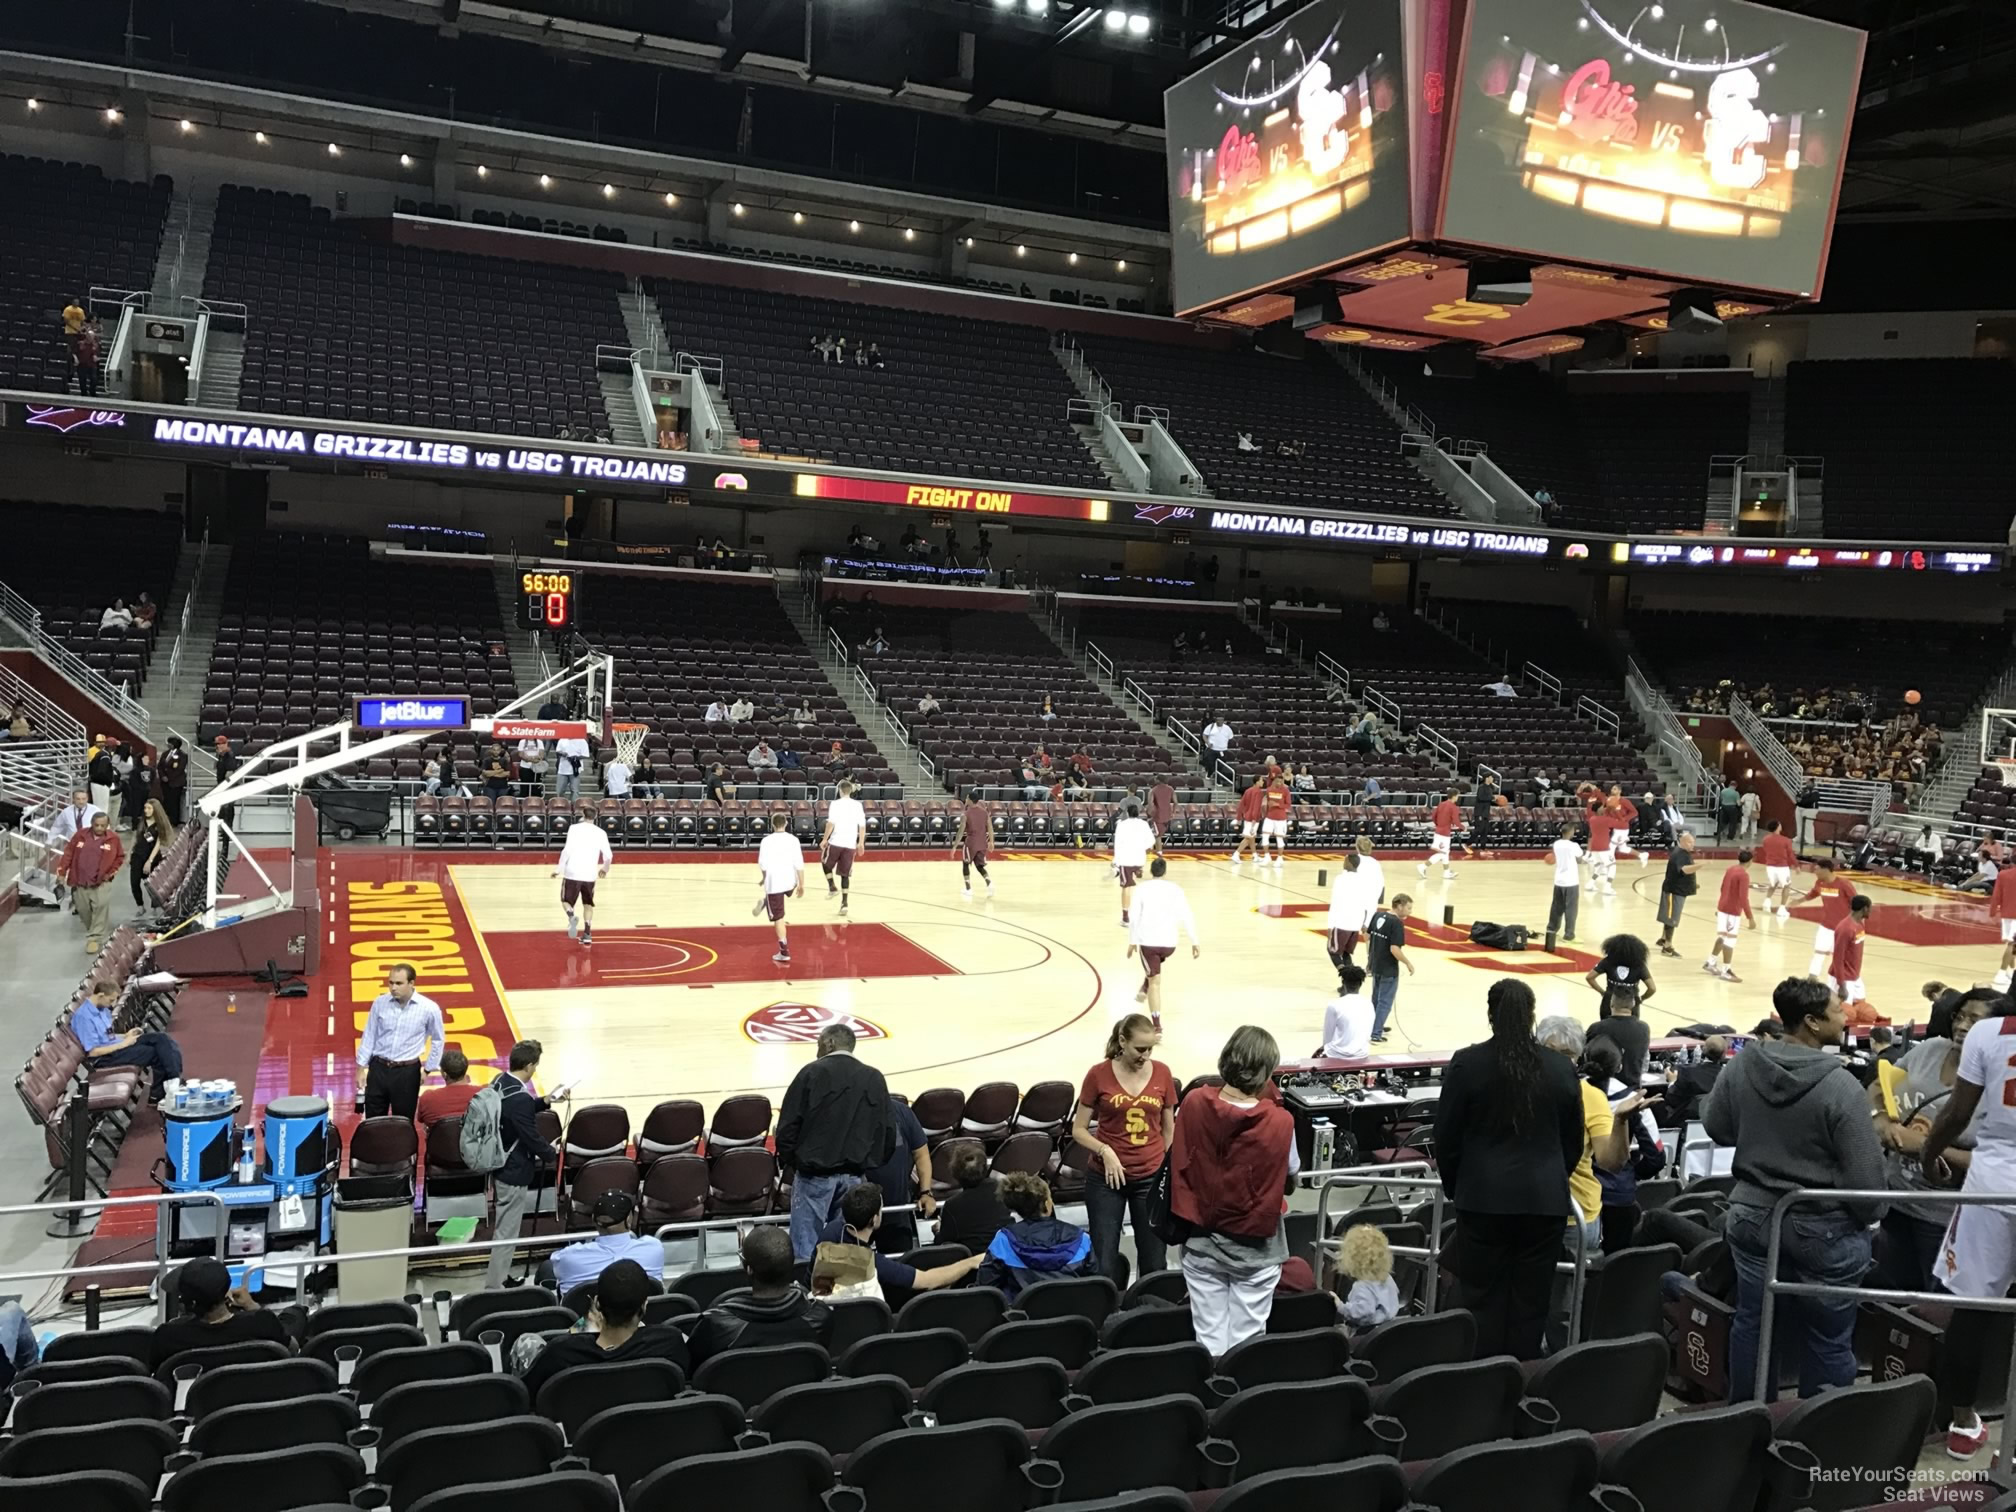 section 114, row 10 seat view  - galen center